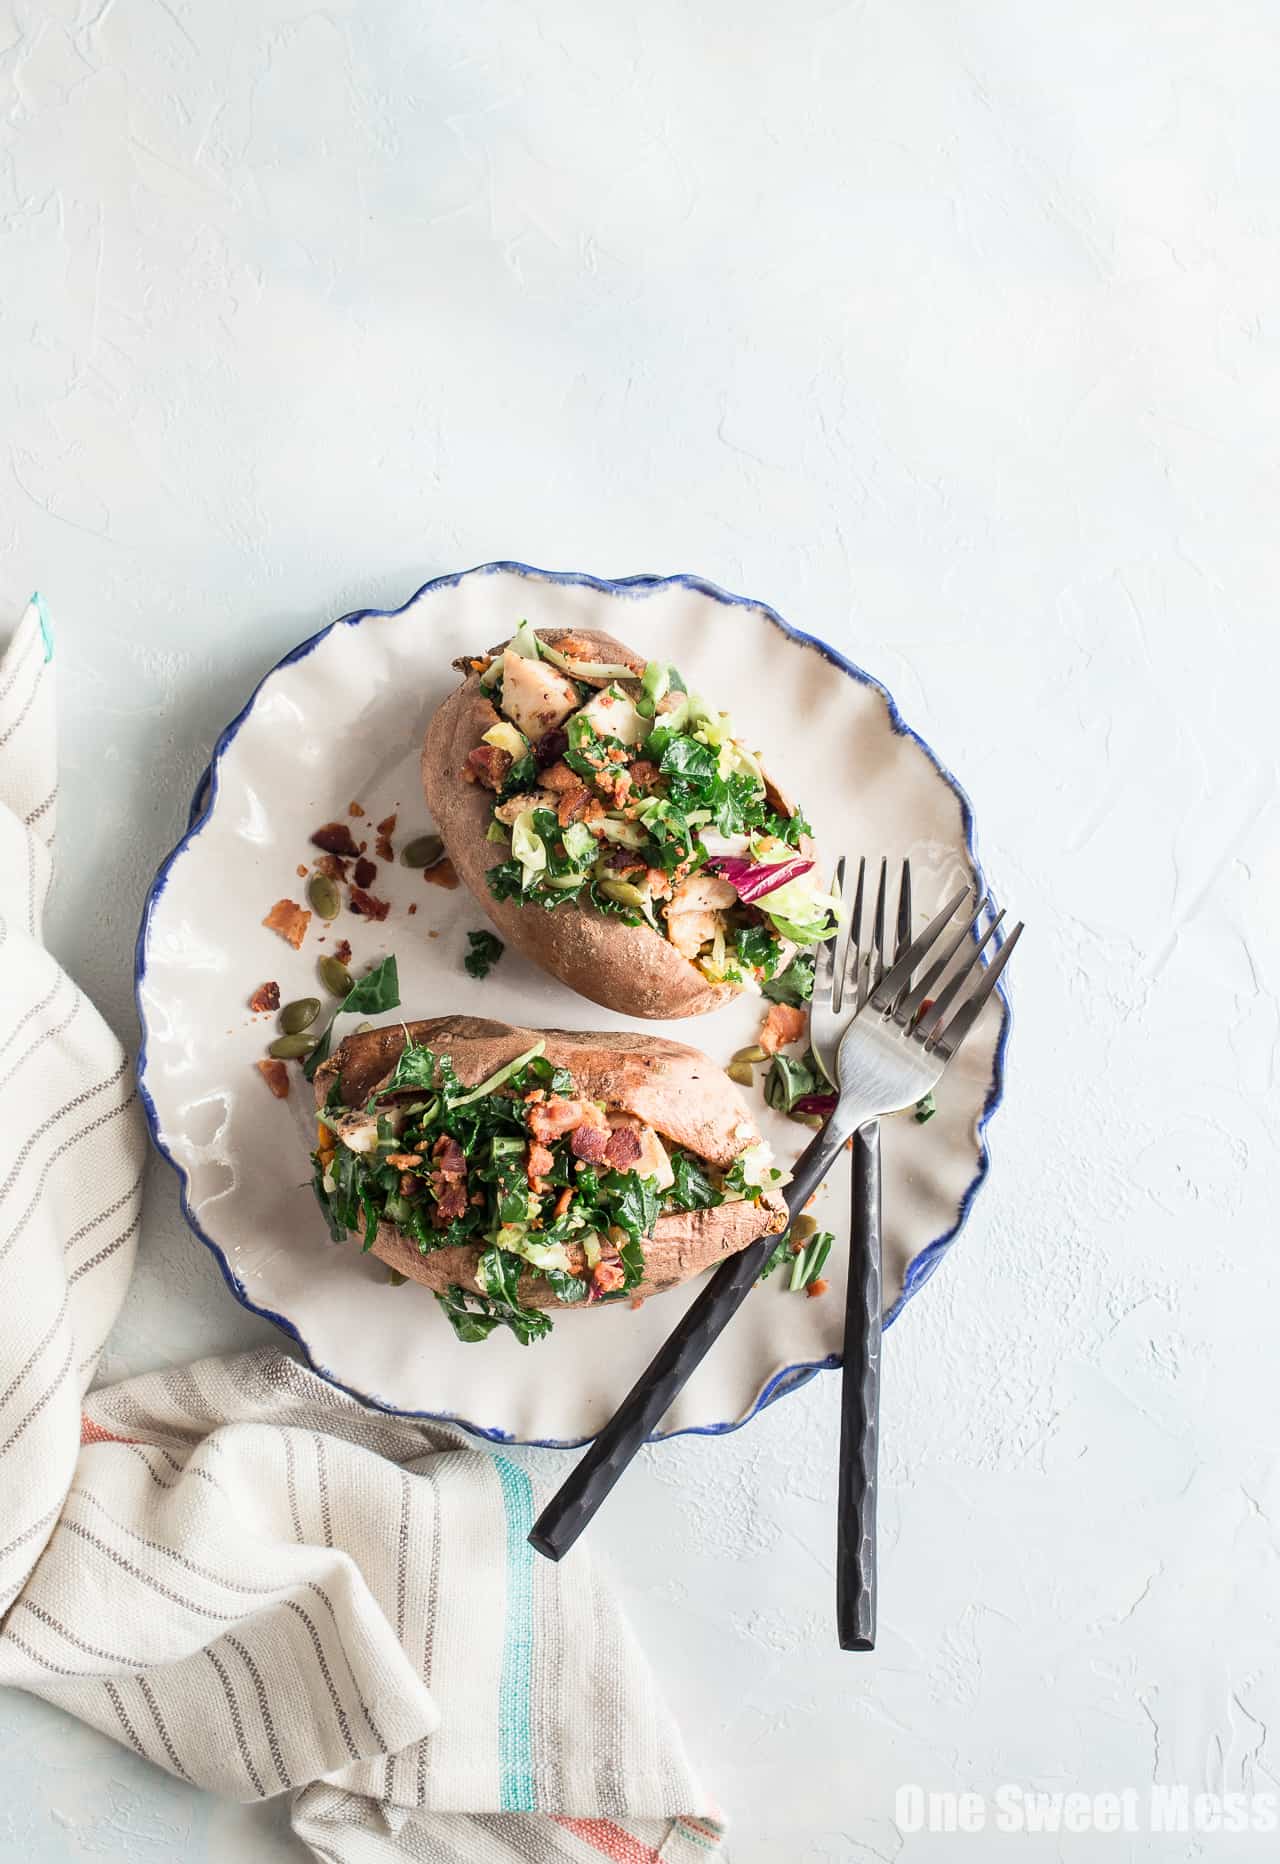 Grilled Chicken & Sweet Kale Salad Stuffed Sweet Potatoes: Loaded with grilled poppy seed dressing glazed chicken and topped with sweet kale salad tossed in warm bacon vinaigrette. Hearty, healthy and gluten-free.